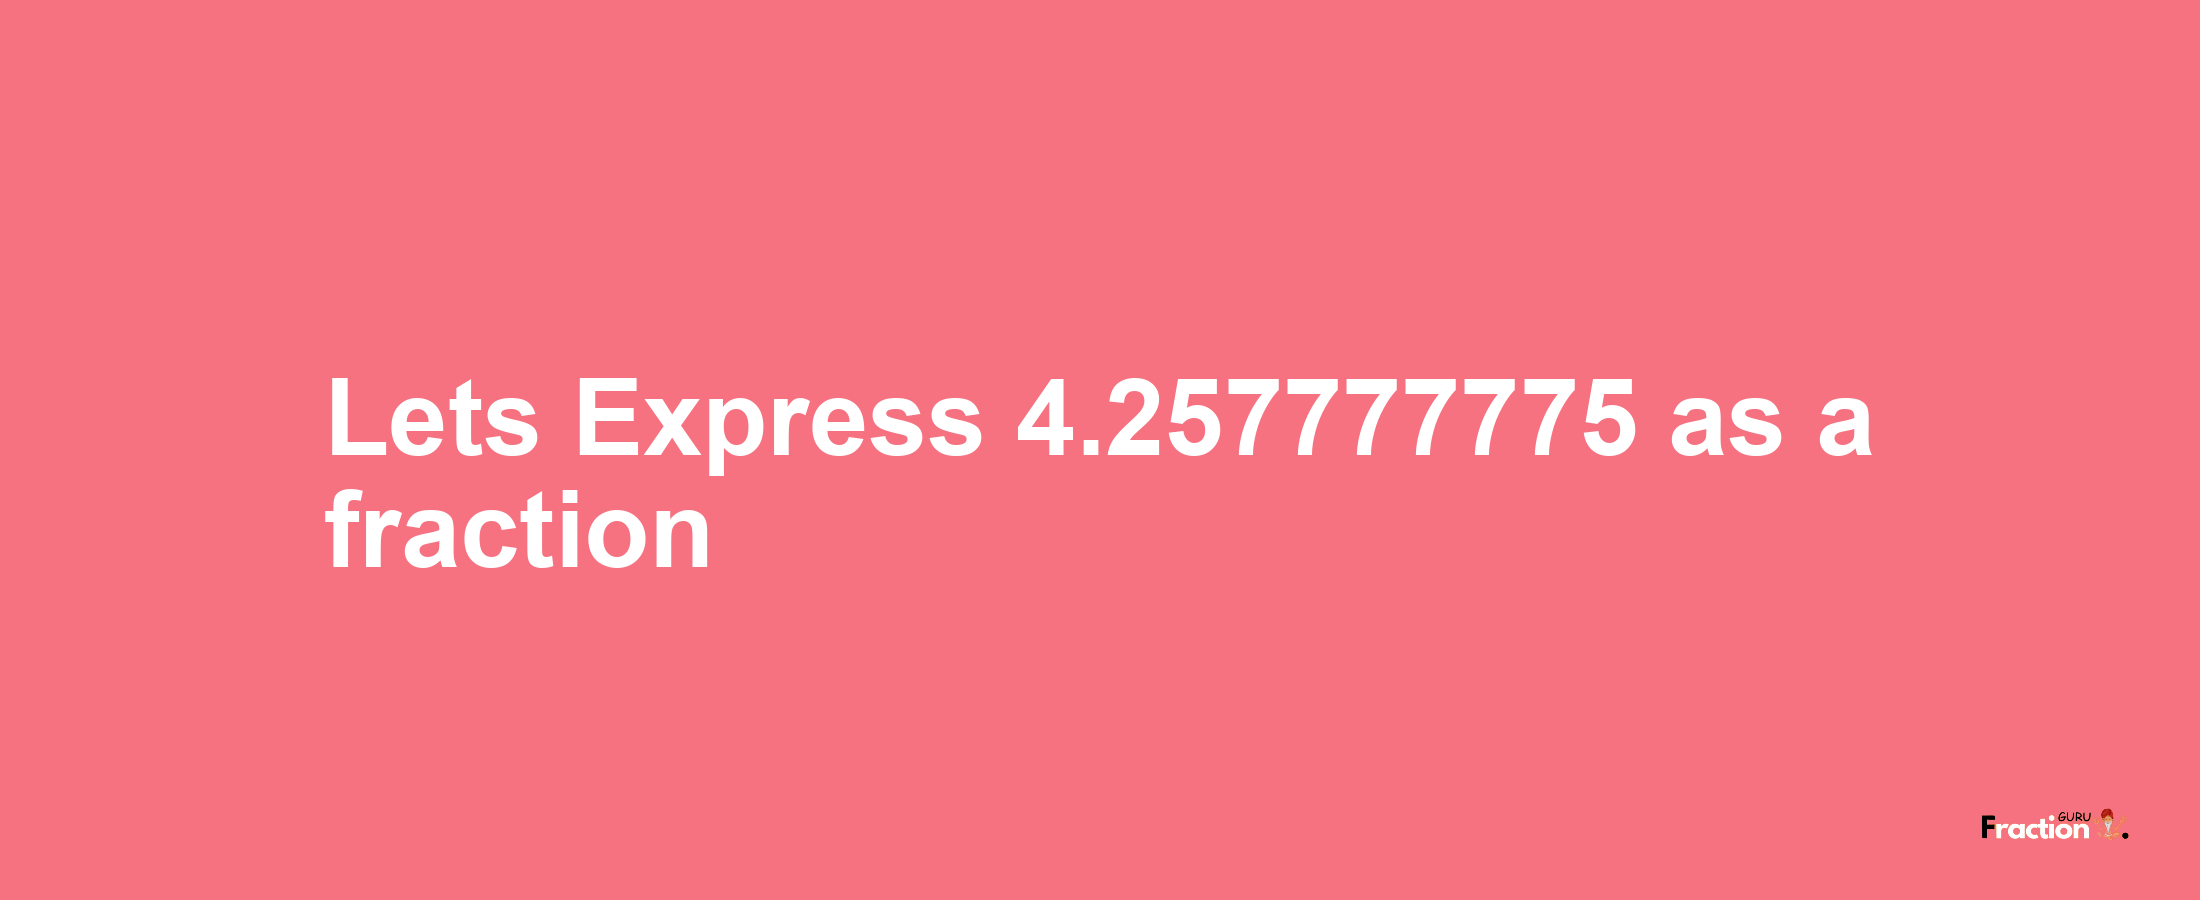 Lets Express 4.257777775 as afraction